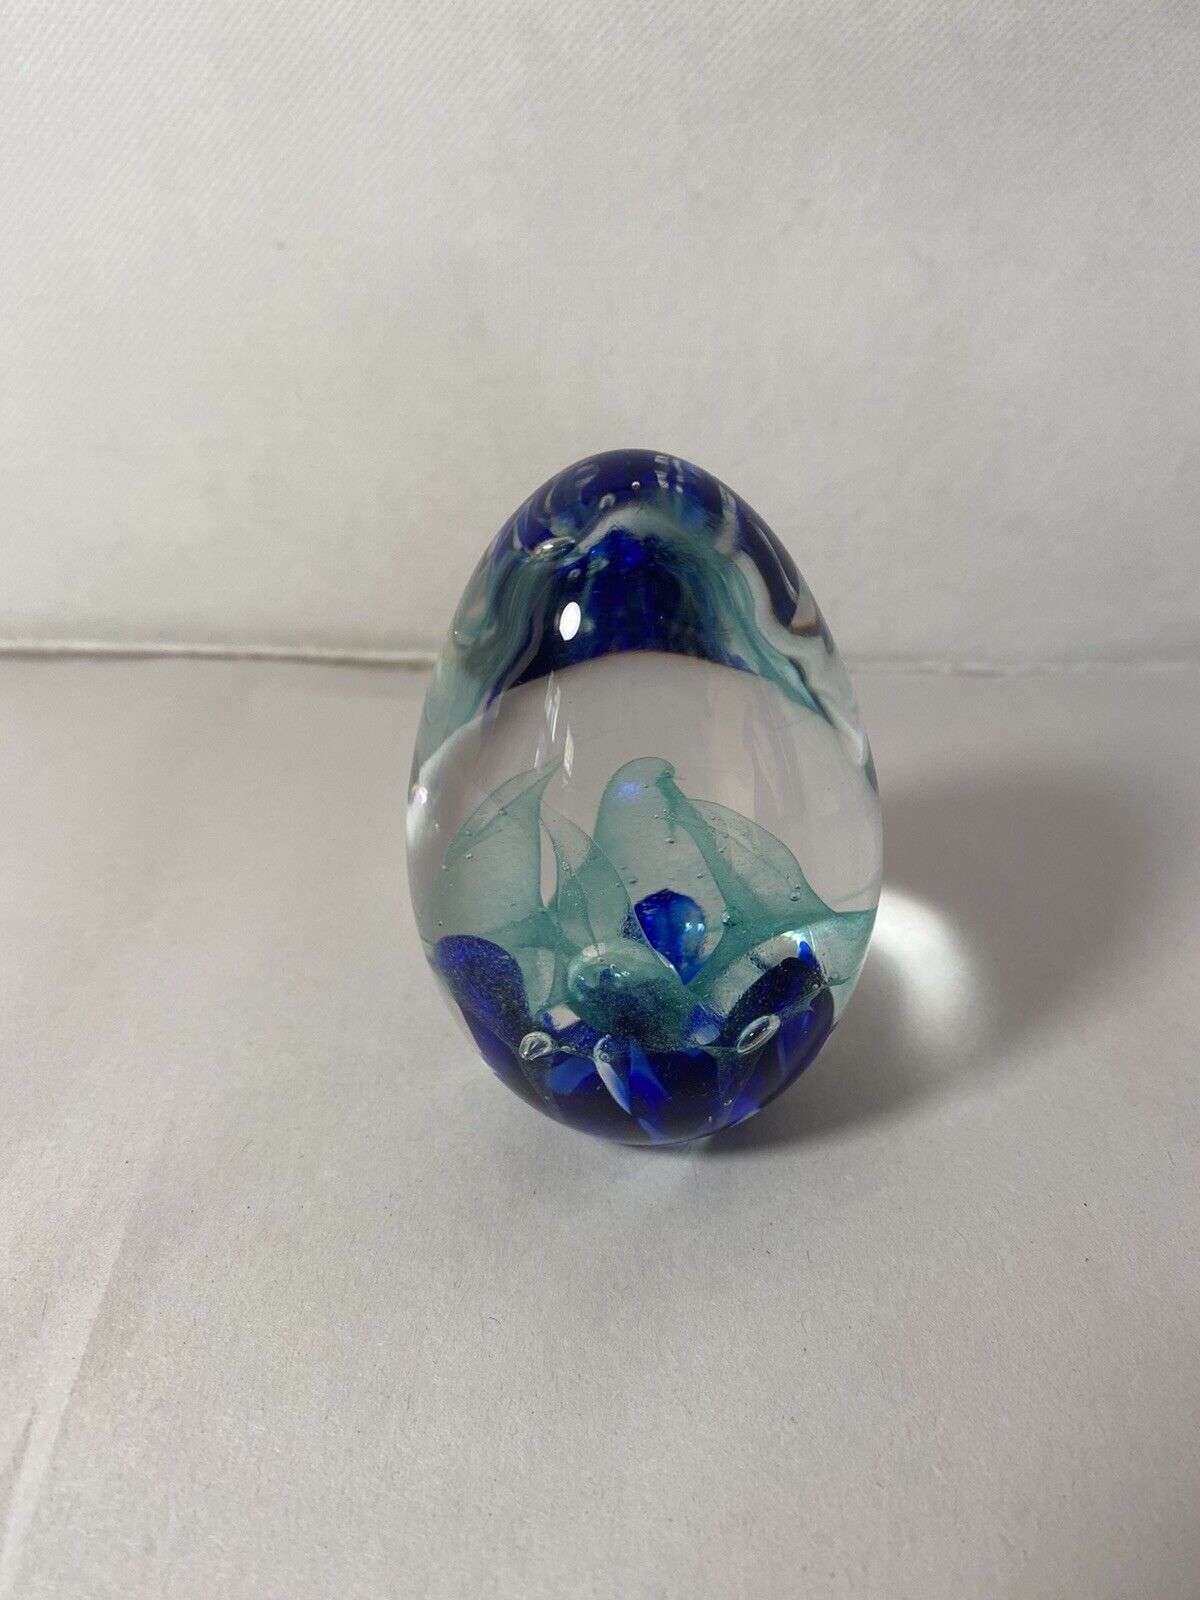 Art Glass Egg Paperweight Vine Studios Signed/ Controlled Bubble 2002